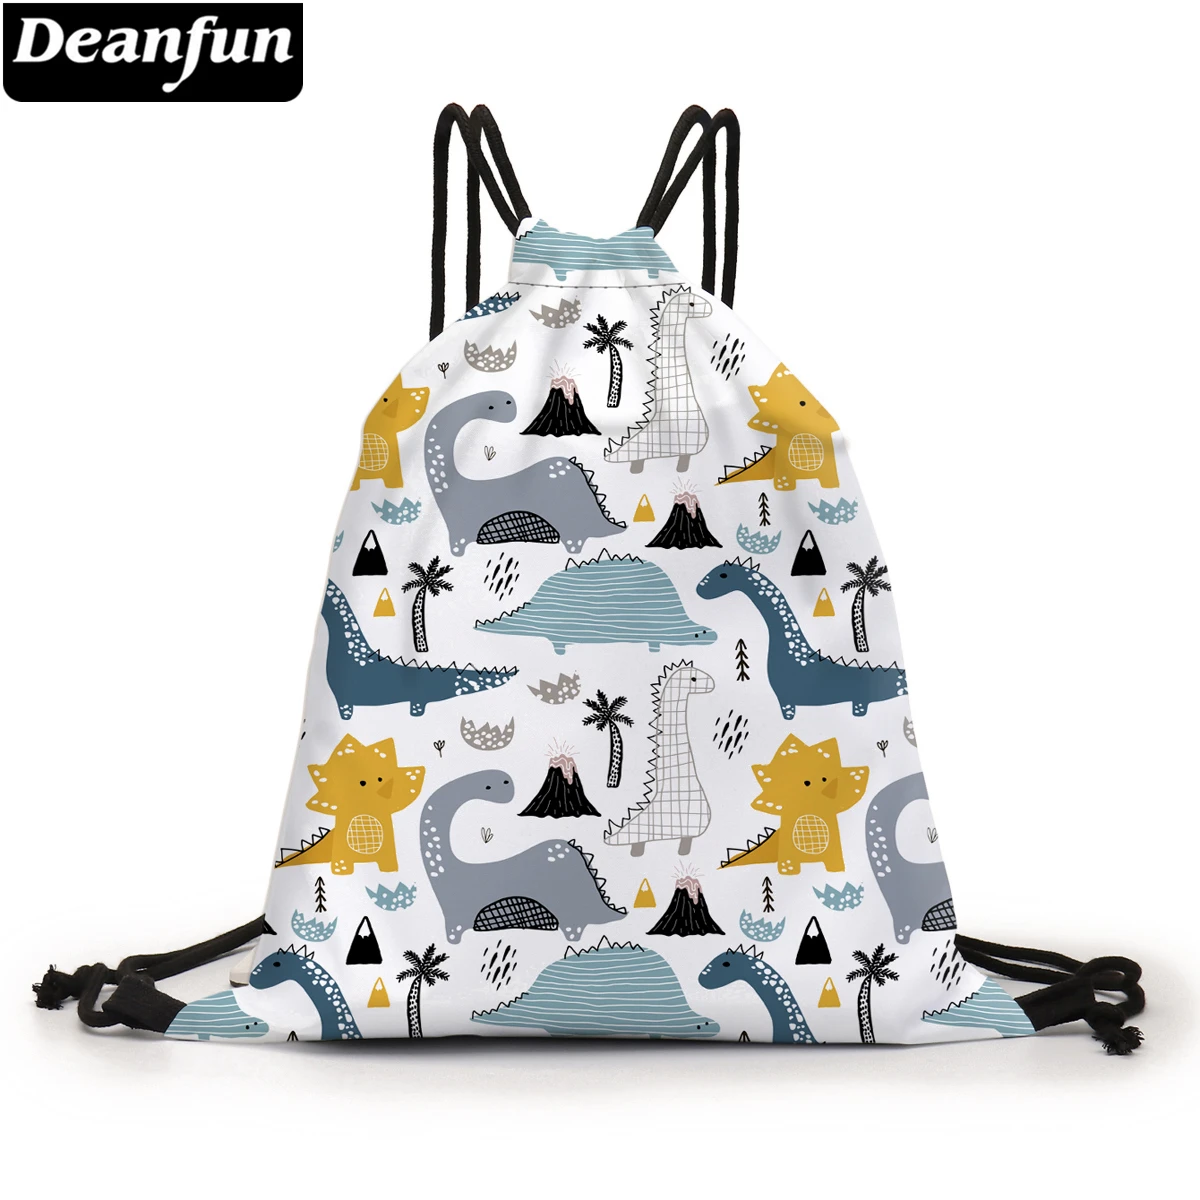 Deanfun Drawstring Bag Colorful Dino 3D Printed Pouch Bag Cute Backpack Purse Bags For TravelD60441